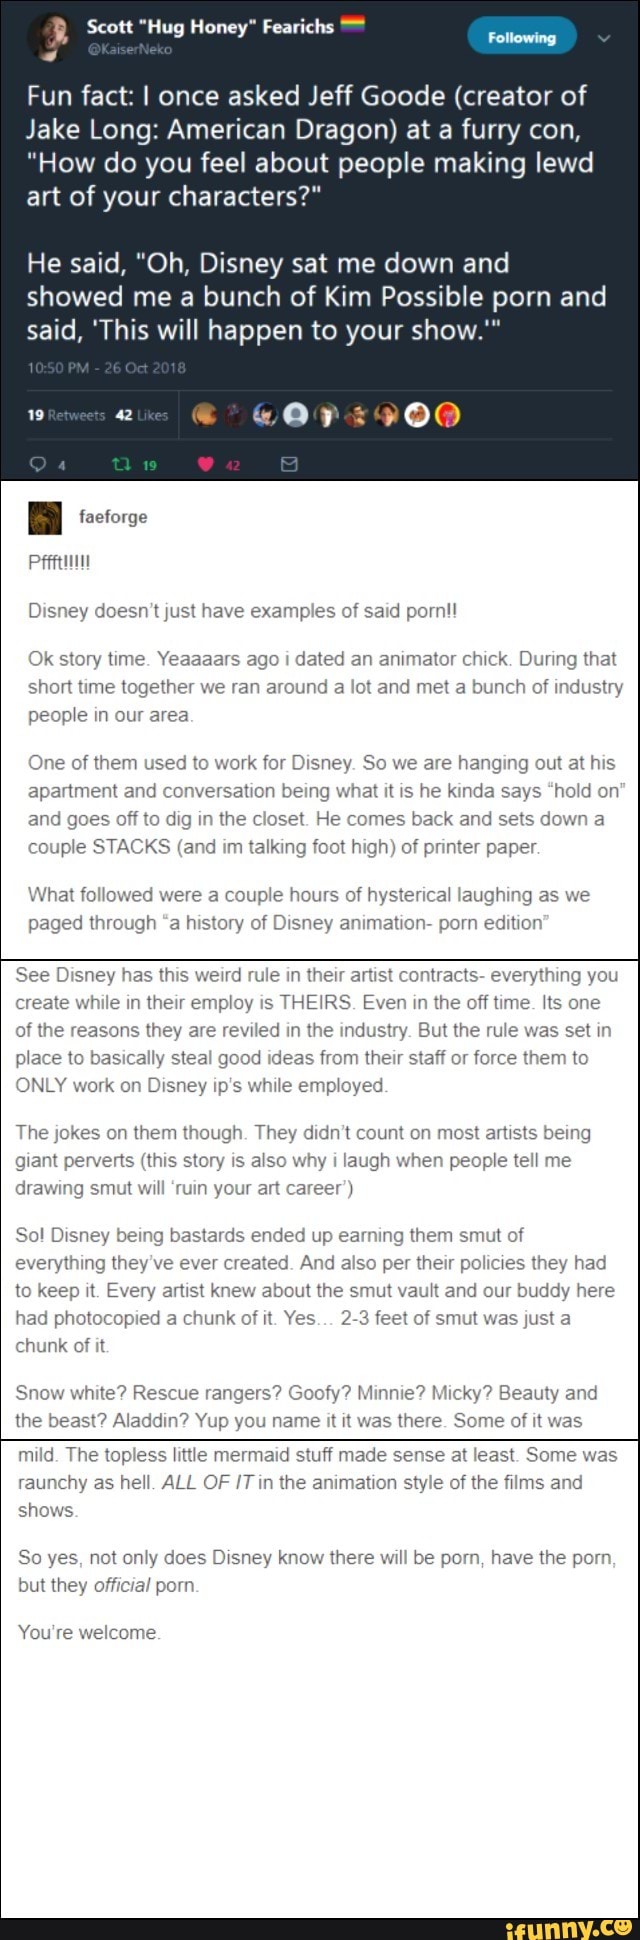 Disney Porn Story - 4' Fun fact: I once asked Jeff Goode (creator of Jake Long American Dragon)  at a